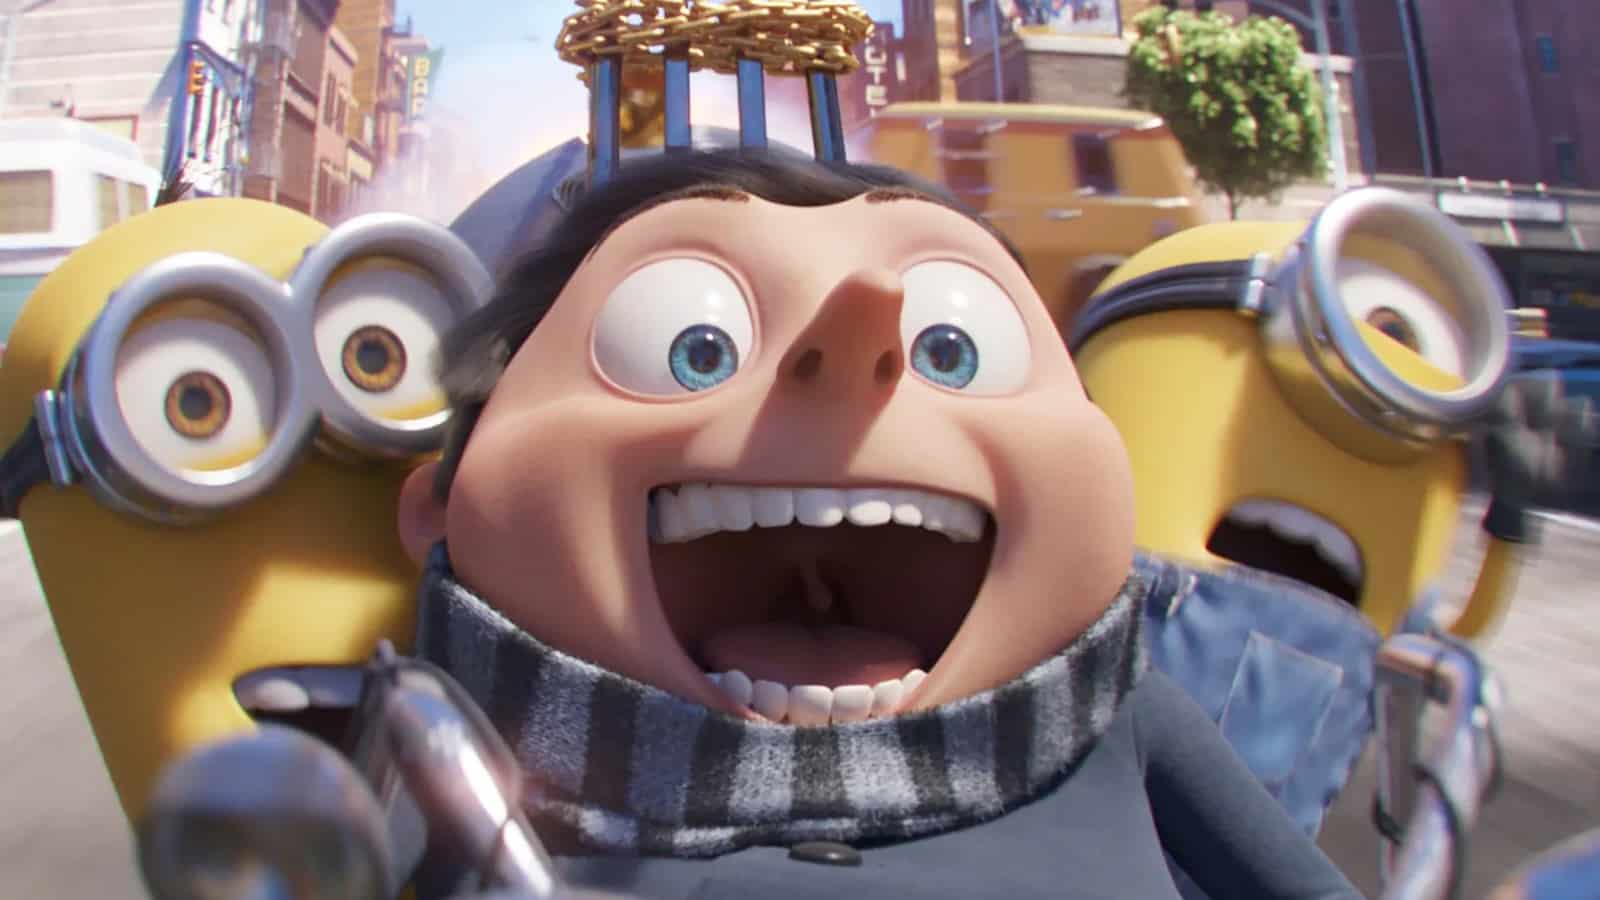 Ridiculous Minions: Rise of Gru meme is taking TikTok by storm